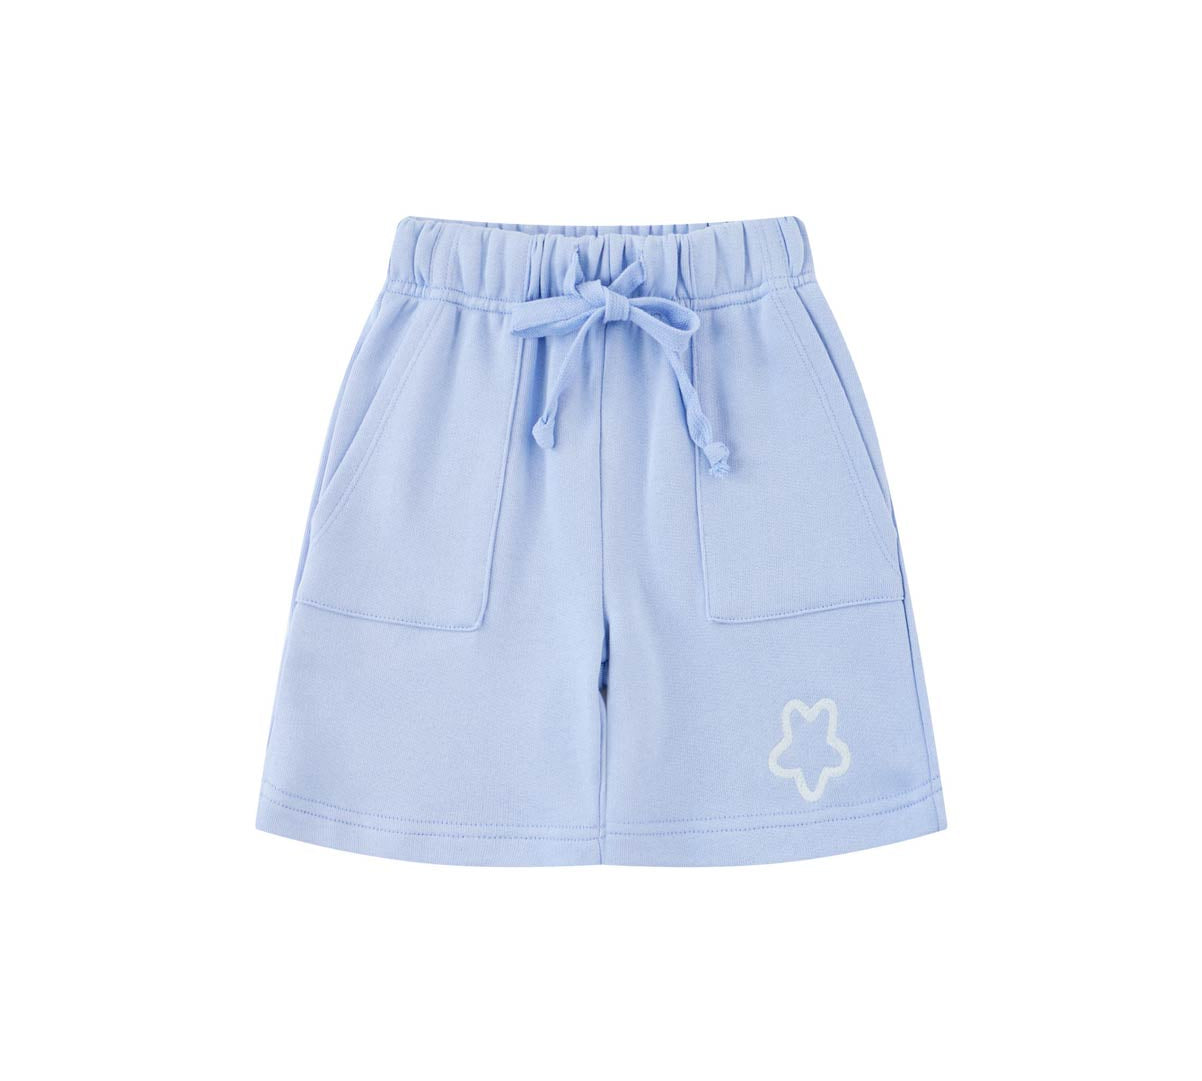 Toddler Organic French Terry Short-Serenity Blue